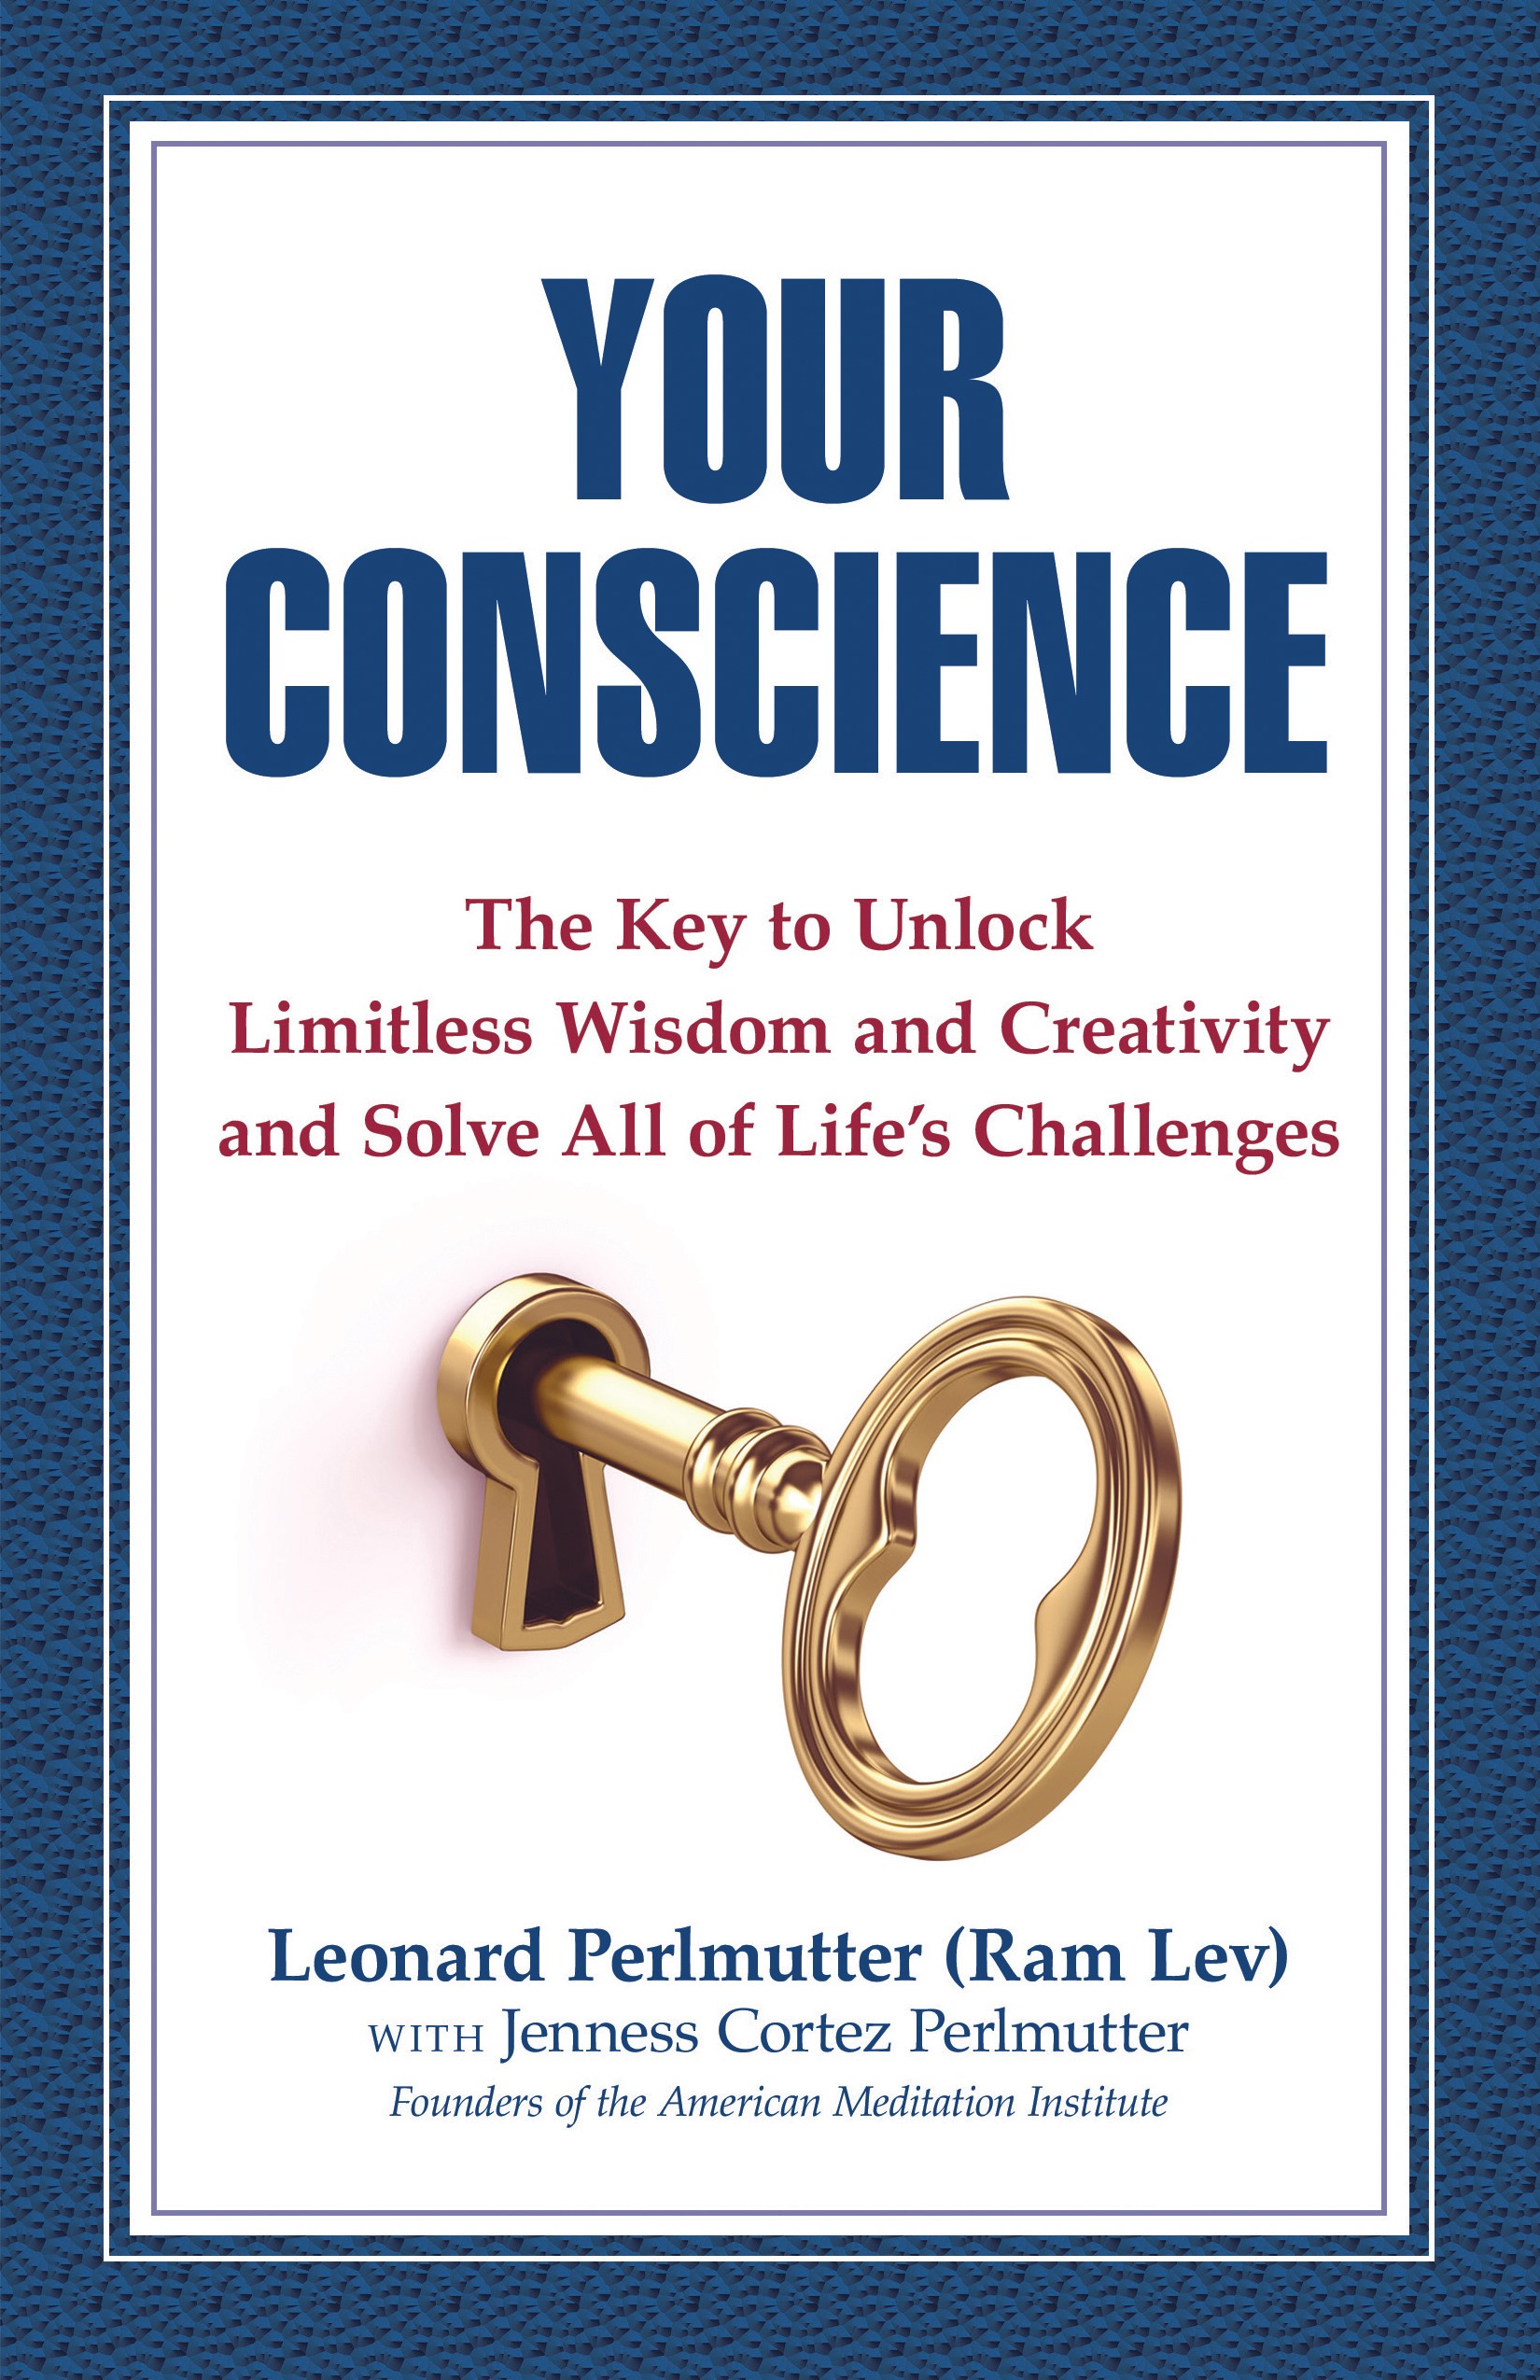 Your Conscience Book by Leonard Perlmutter (Ram Lev)